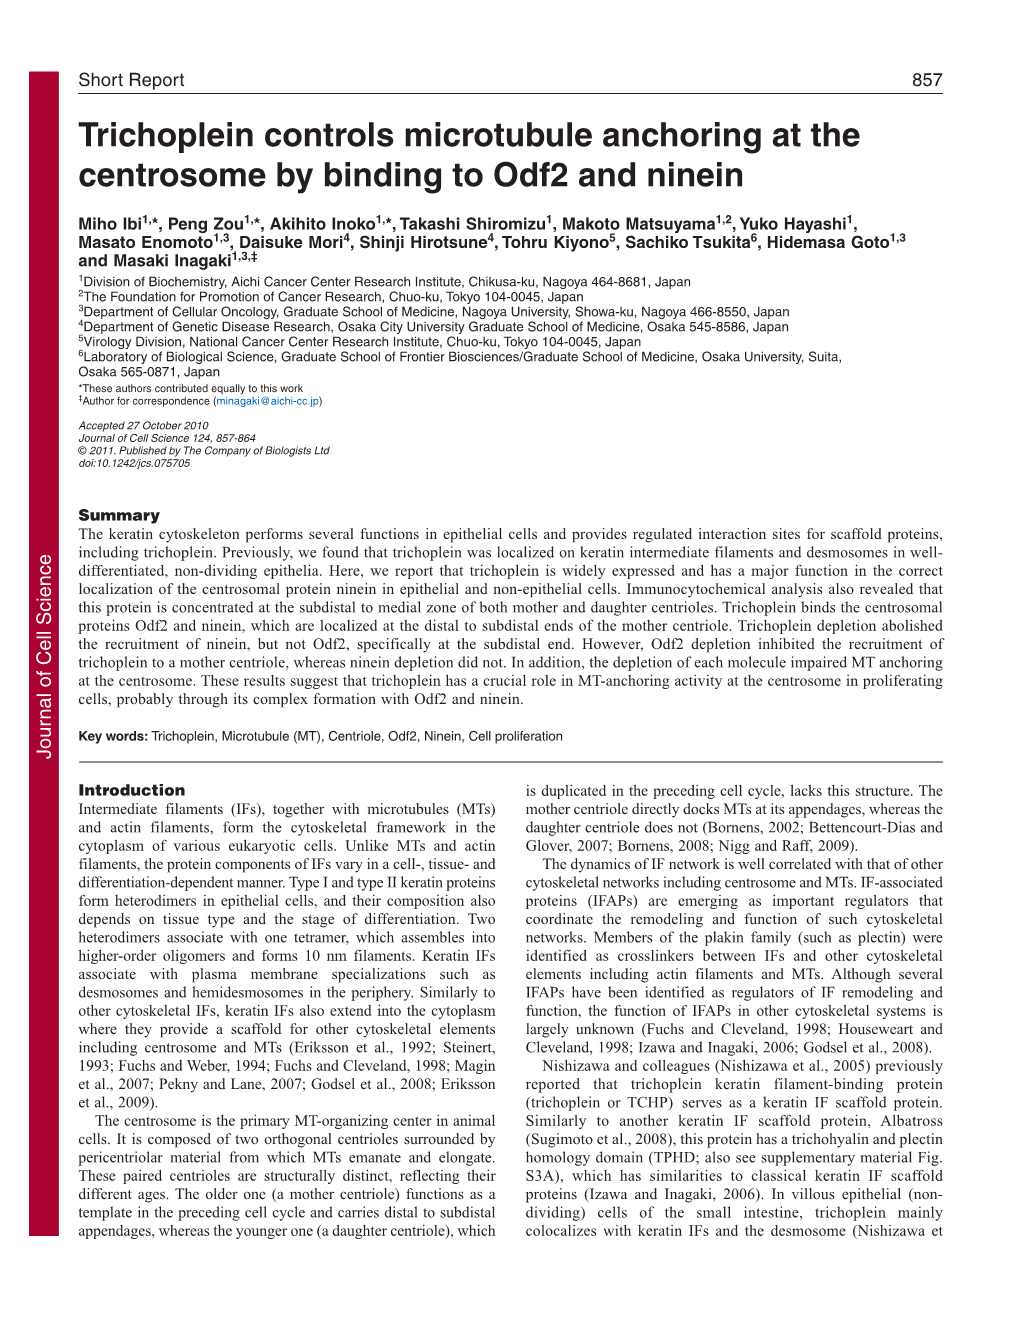 Trichoplein Controls Microtubule Anchoring at the Centrosome by Binding to Odf2 and Ninein